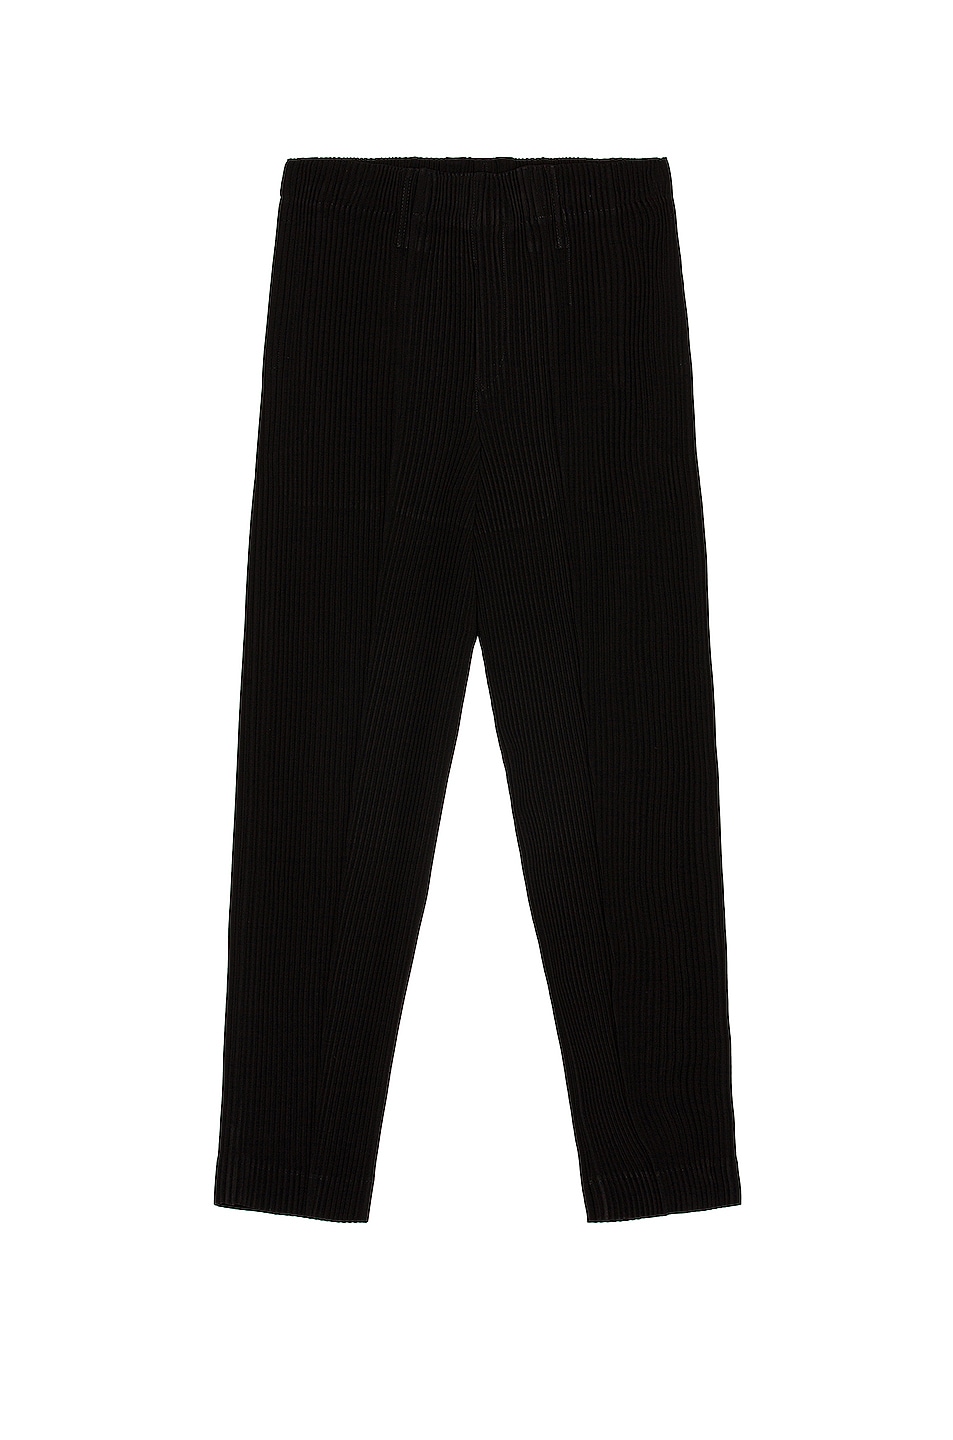 Image 1 of Homme Plisse Issey Miyake Tuxedo Pleats Tapered w/ Darts Pant in Black